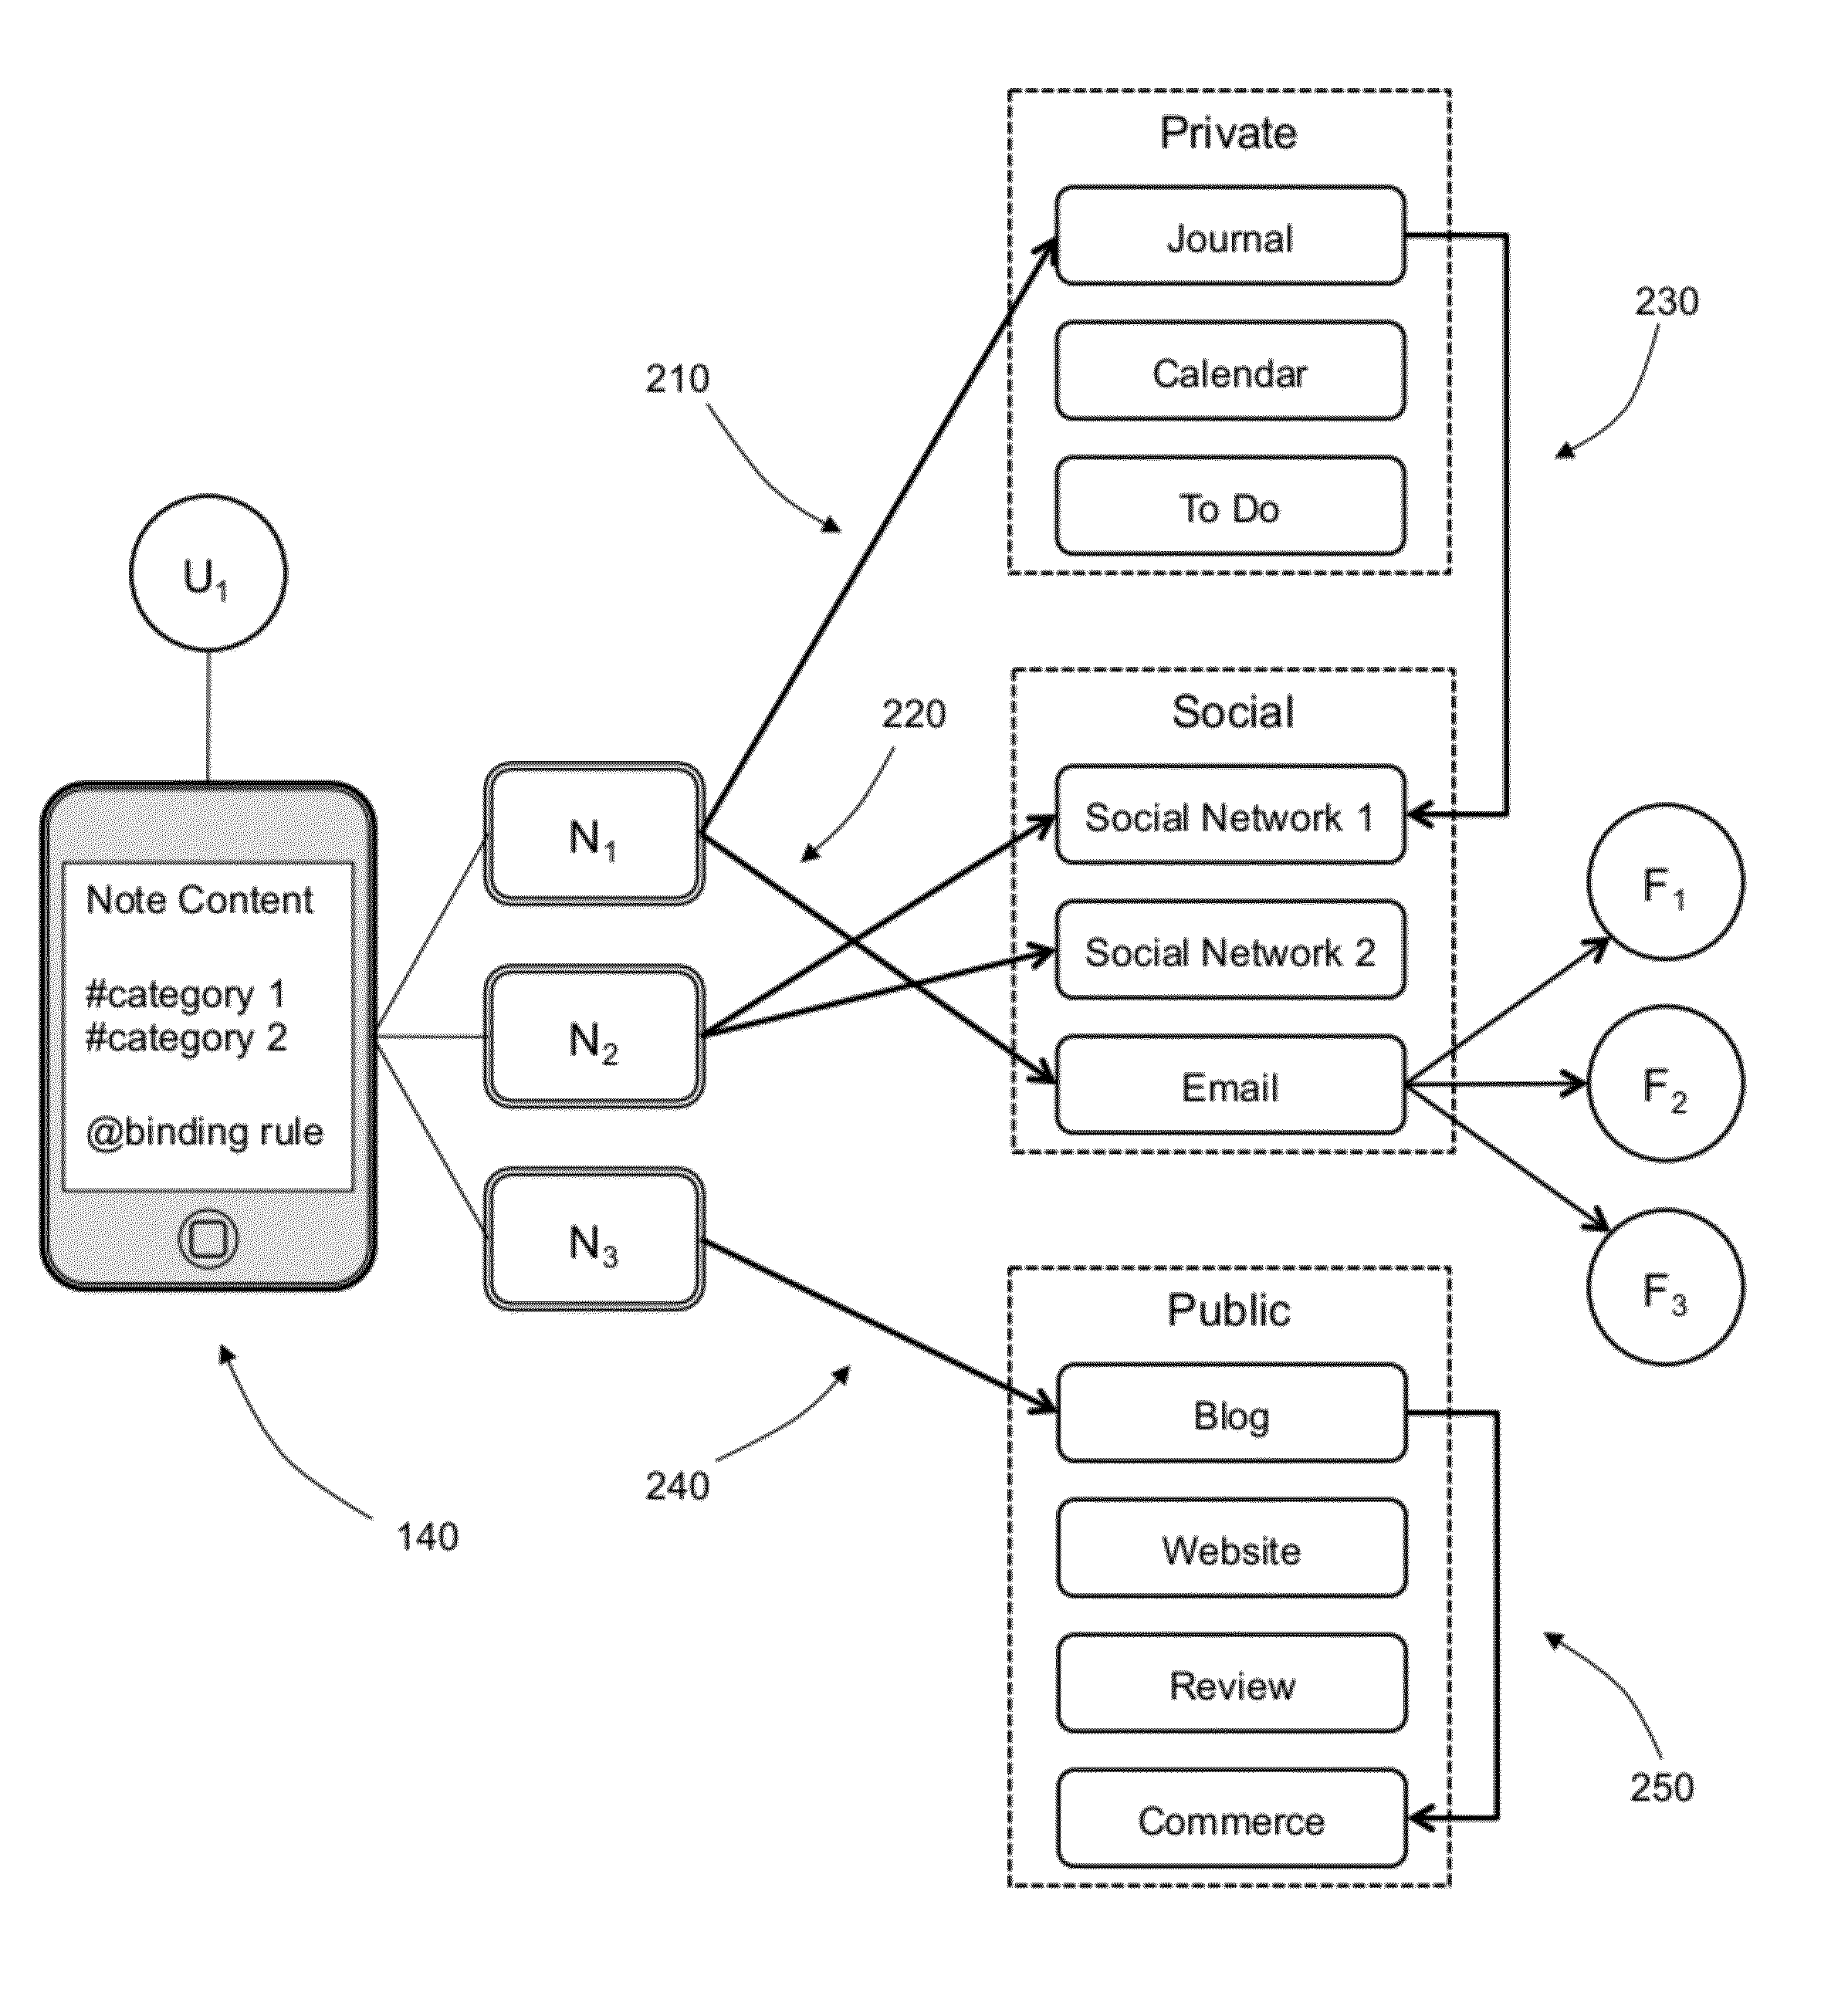 Mobile Content Capture and Discovery System based on Augmented User Identity